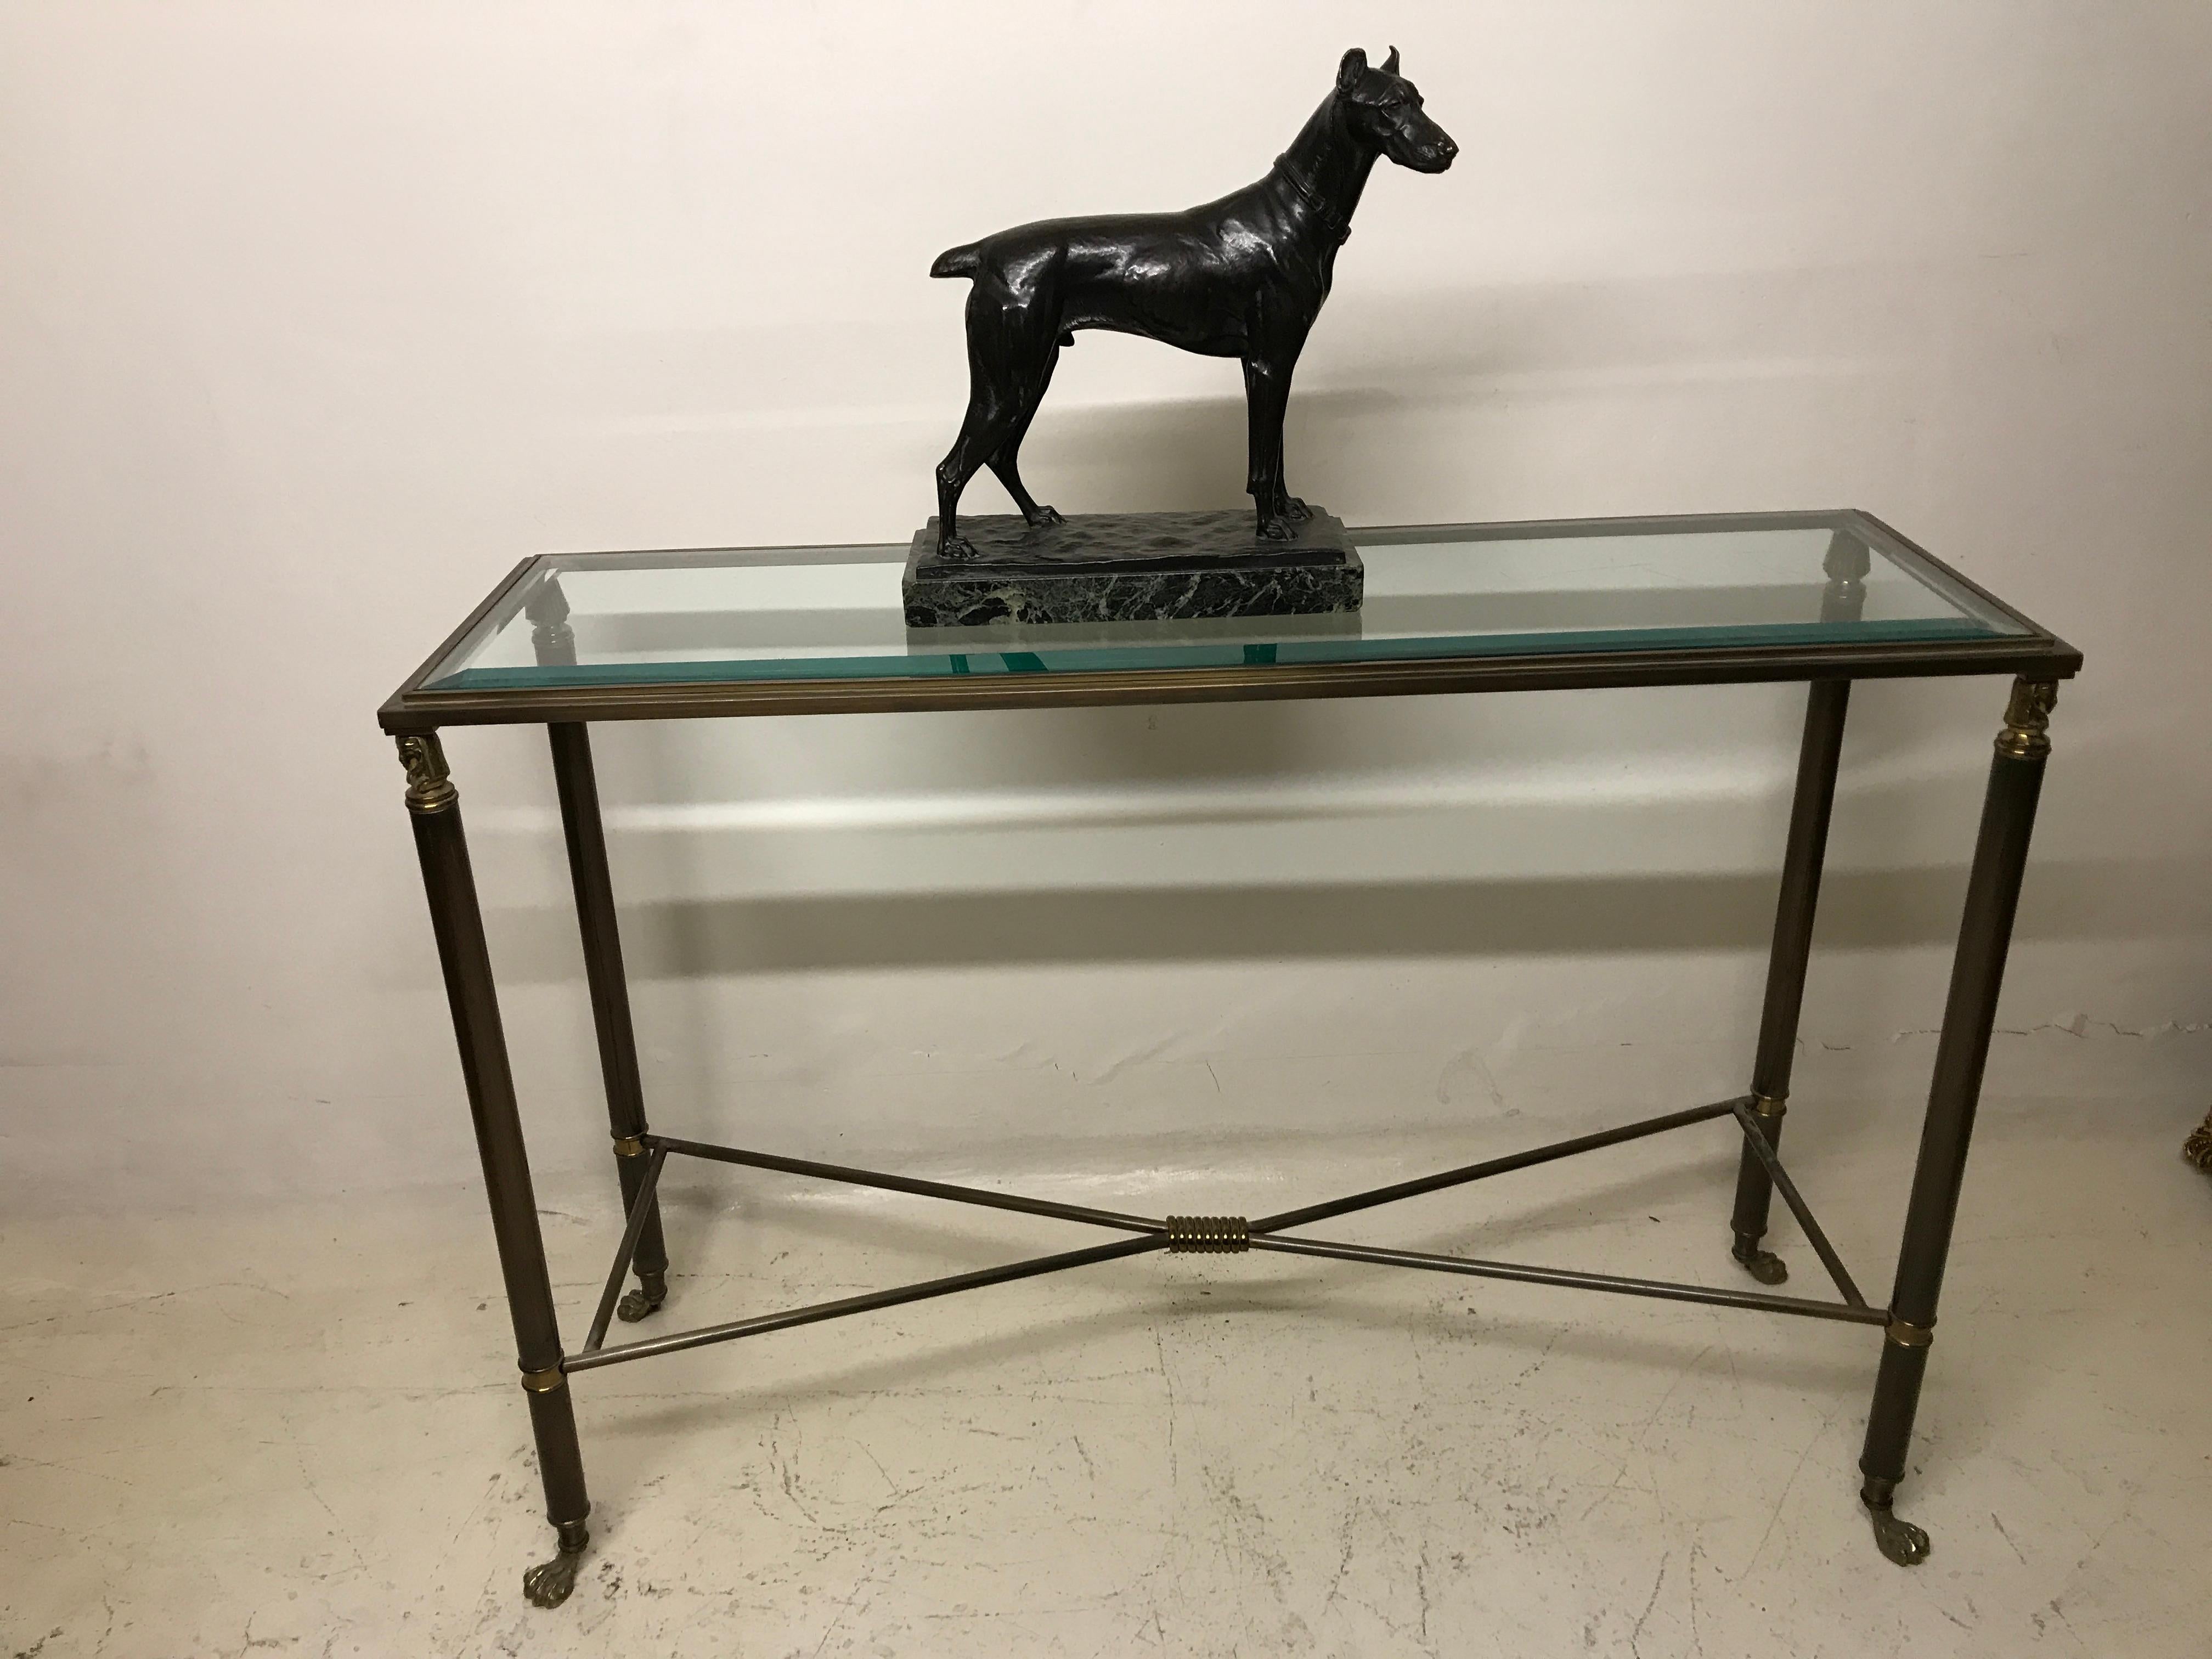 4 Consoles Style Art Deco 1930, egyptian motif, France, Bronze and glass For Sale 6